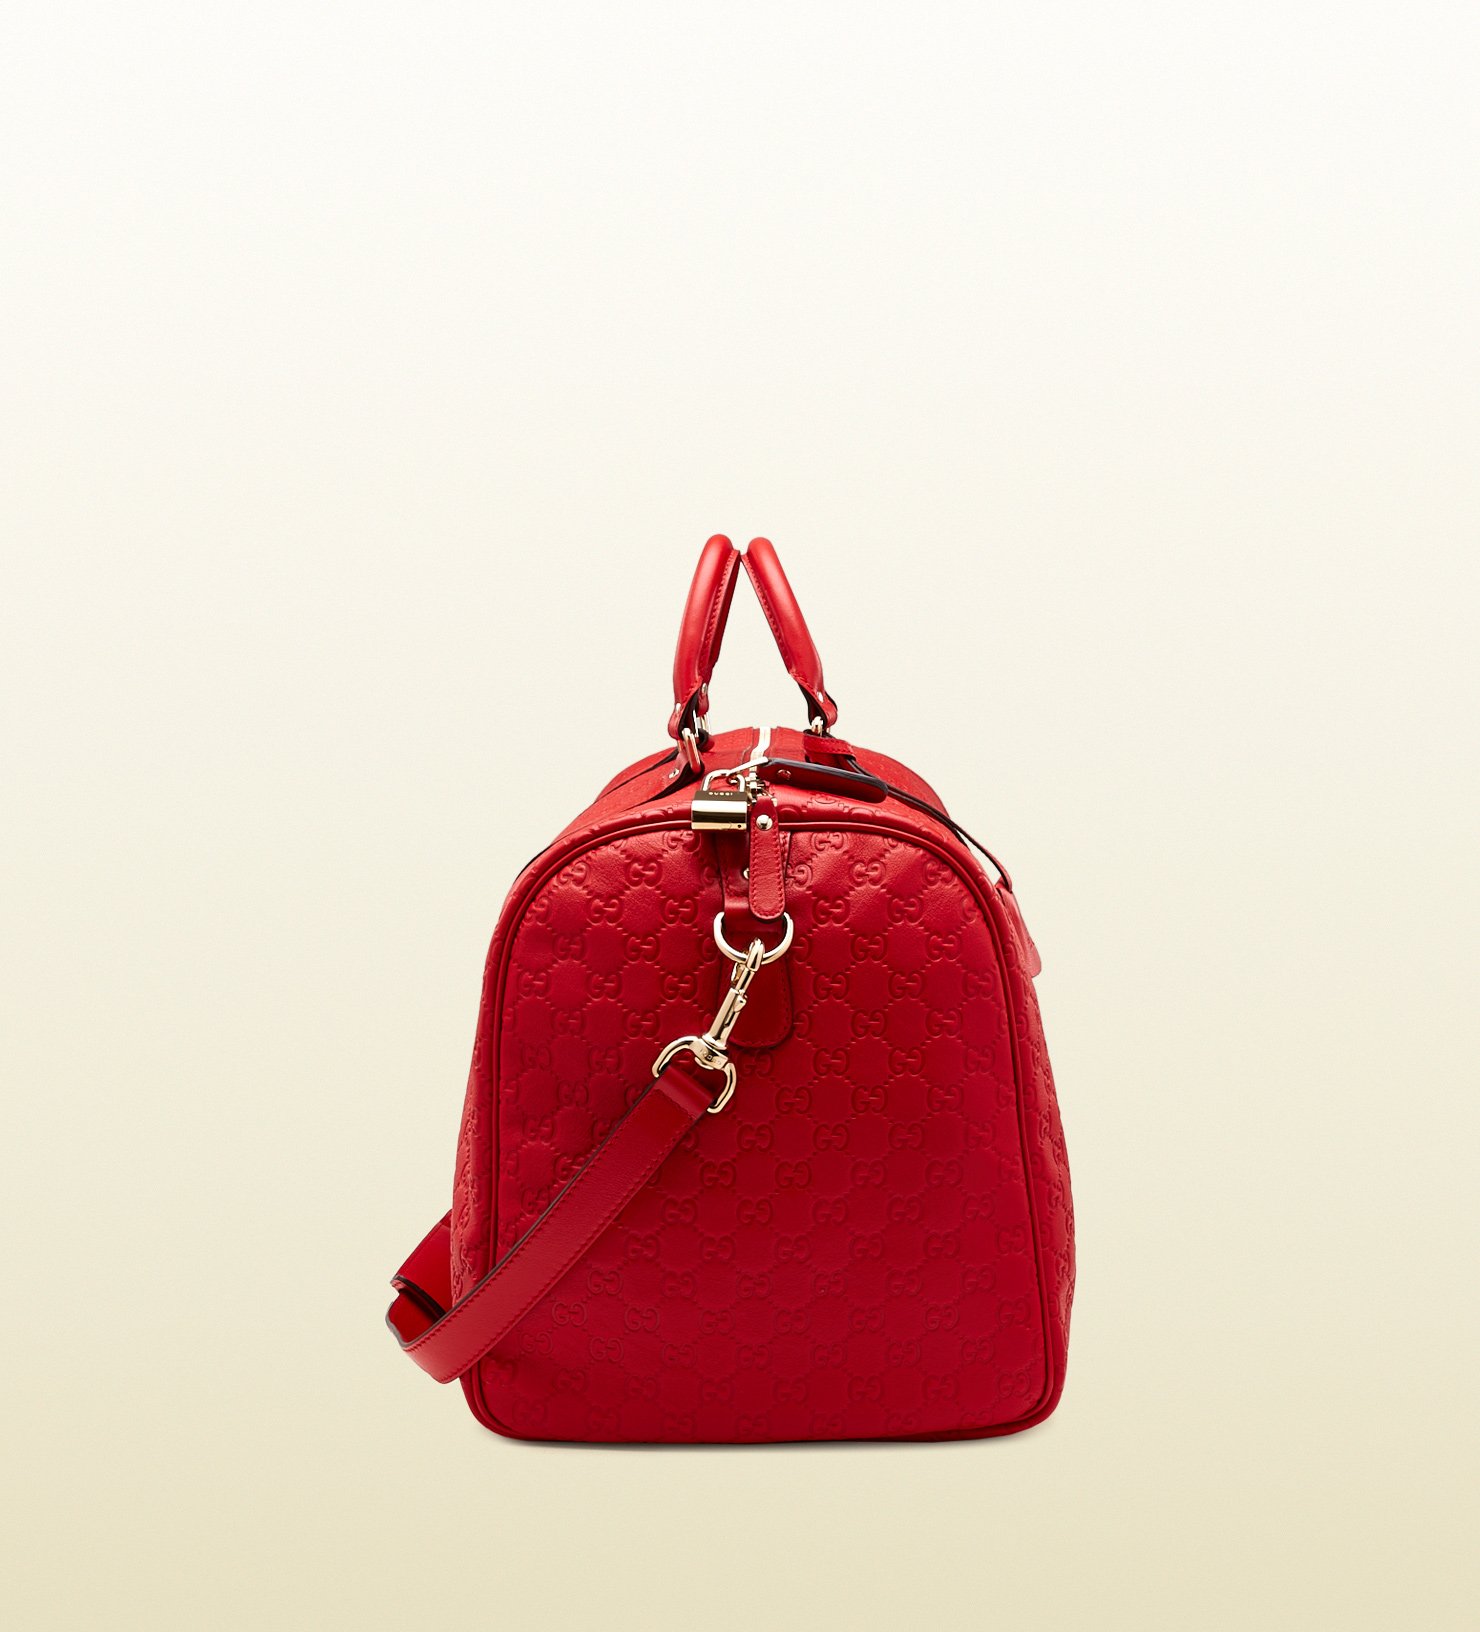 gucci red bag price